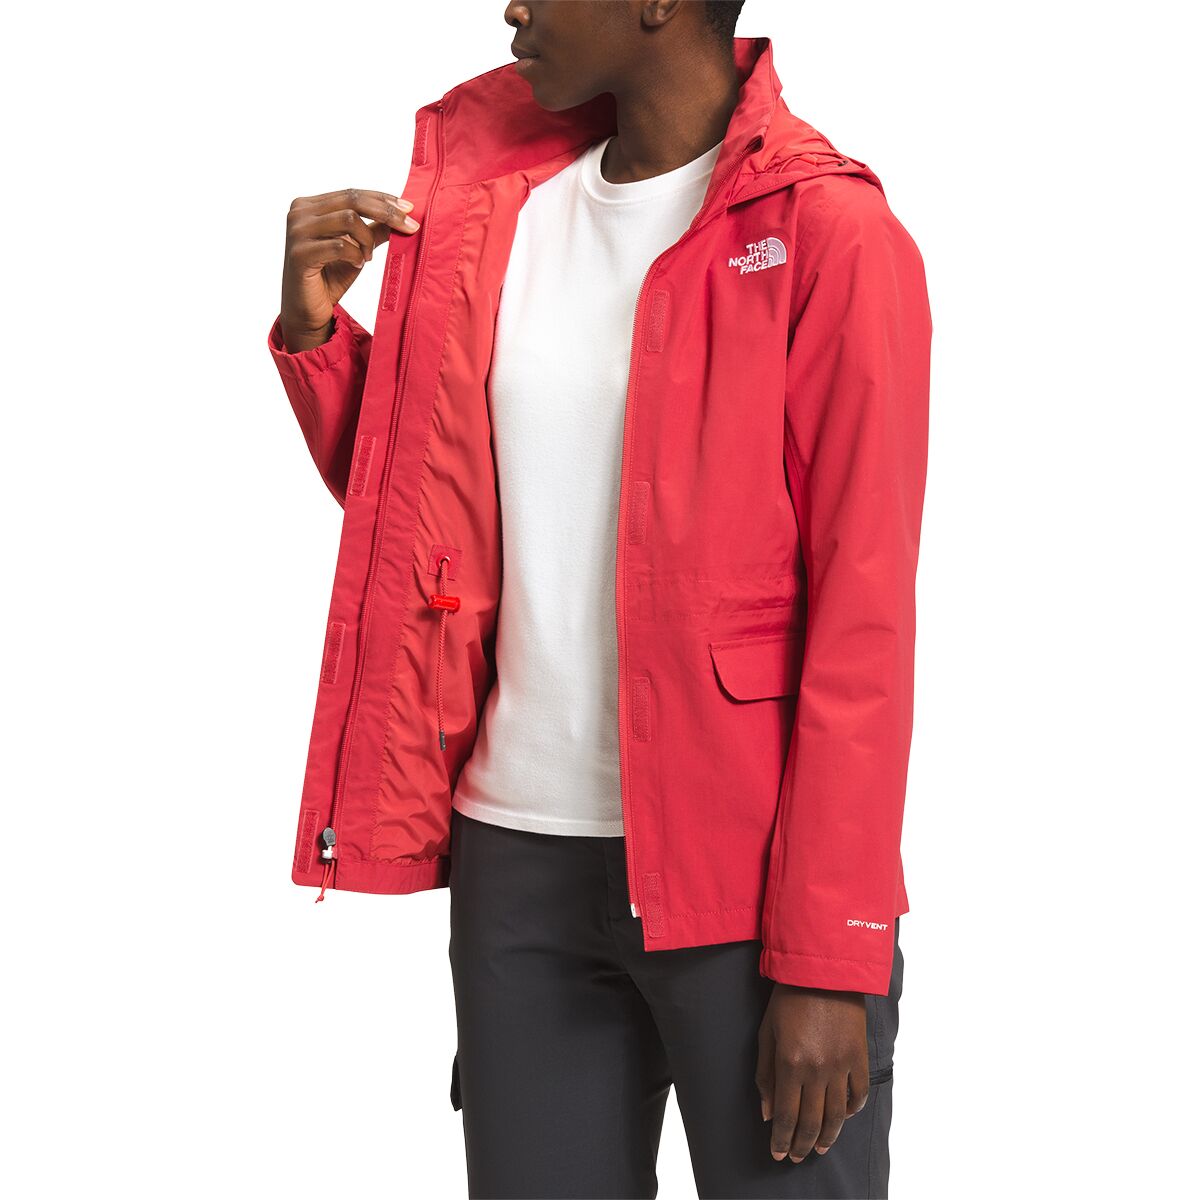 The North Face Zoomie II Jacket - Women's | Backcountry.com